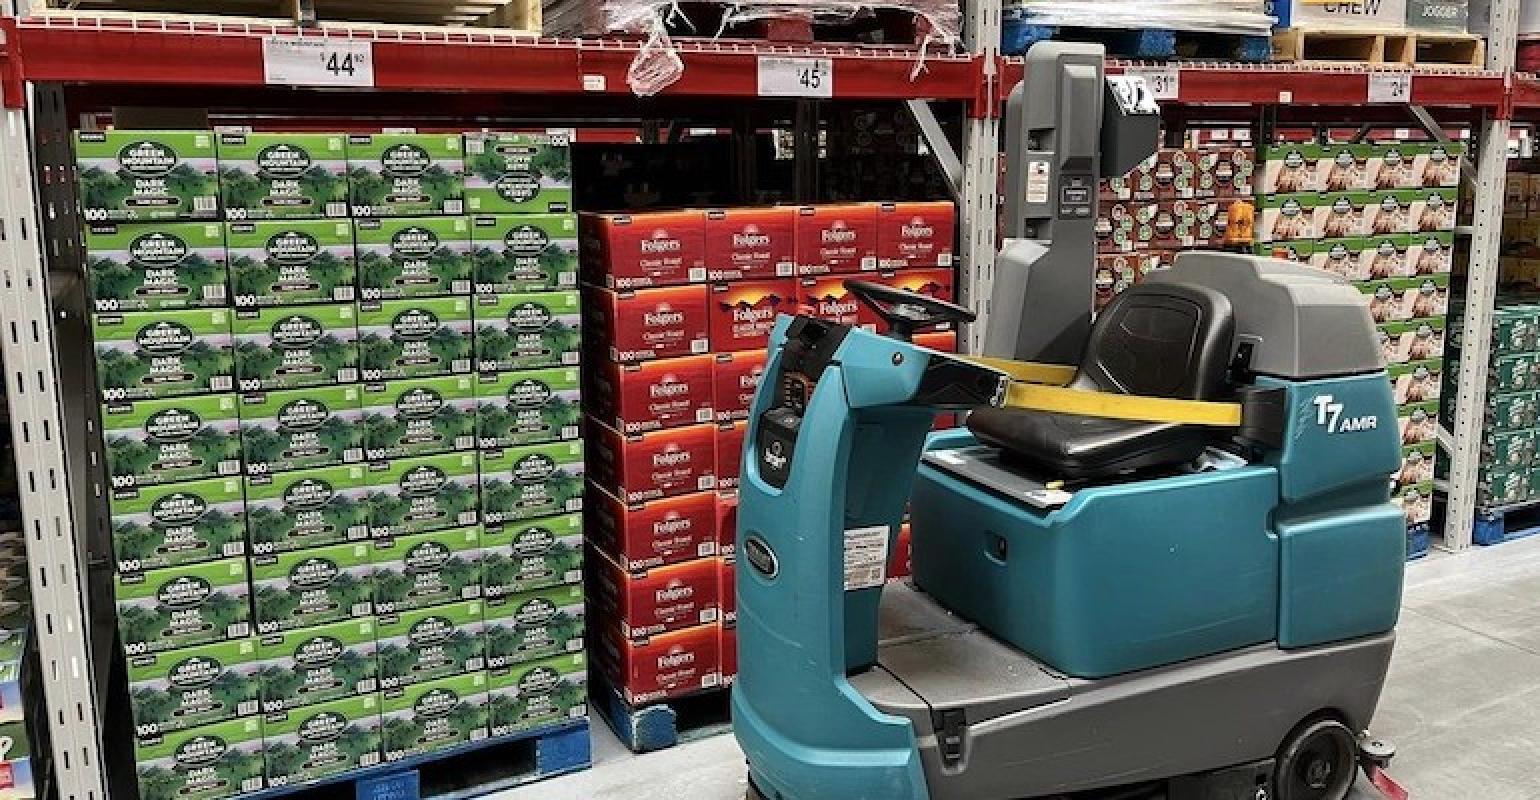 Sam's Club Replaces Receipt Checks With AI-Powered Scans